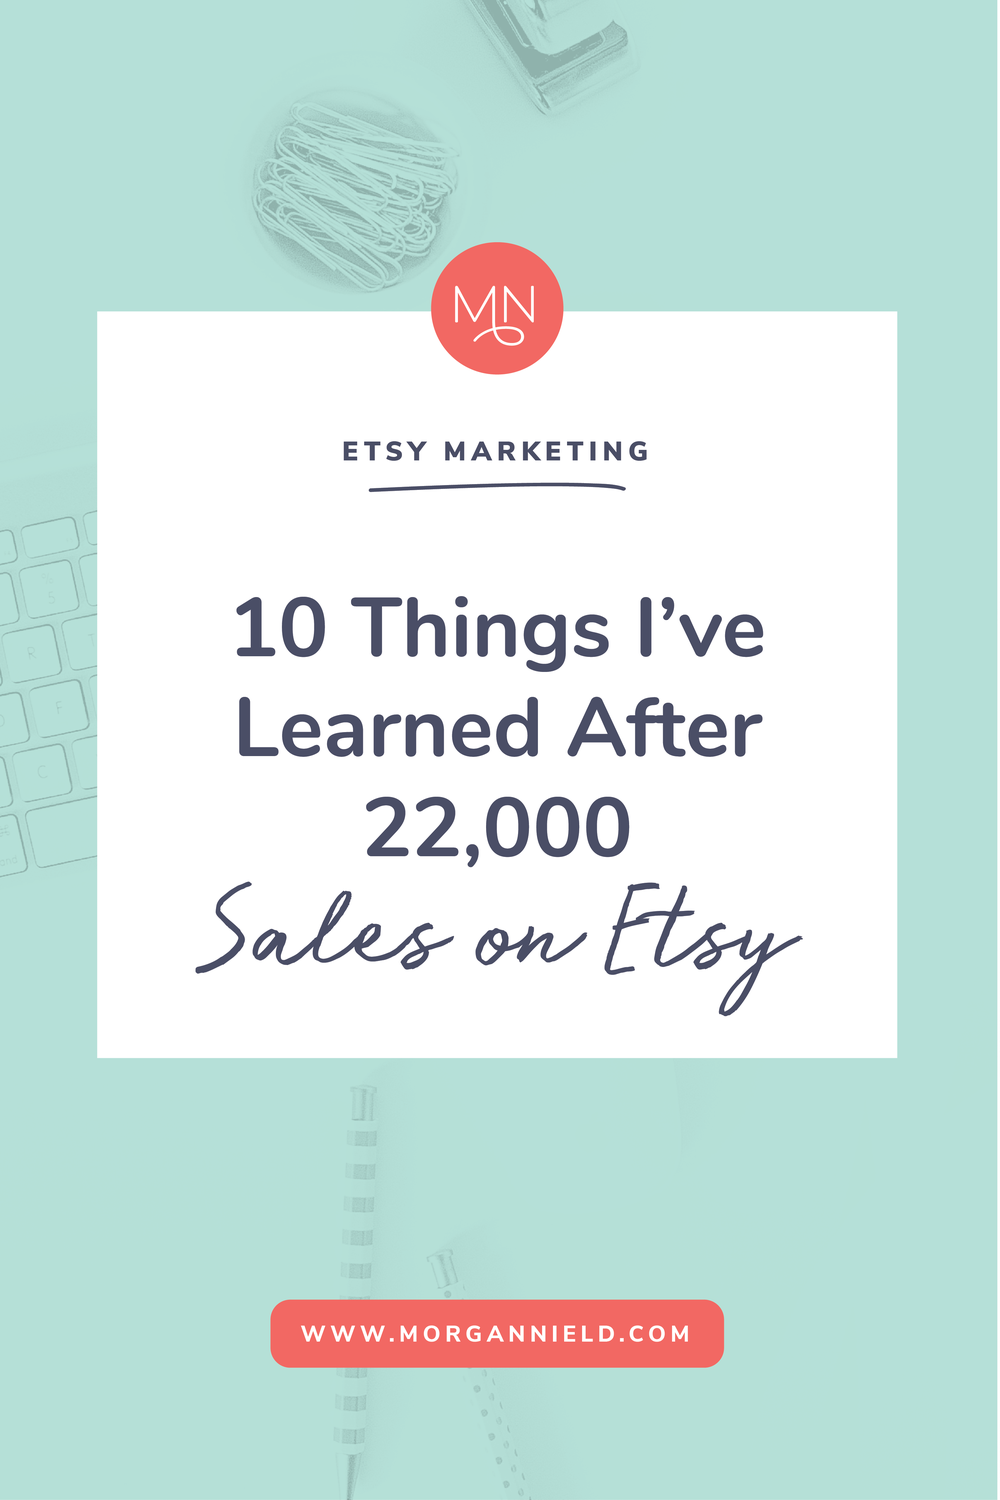 How to sell on Etsy: proven tactics shared by successful Etsy shops